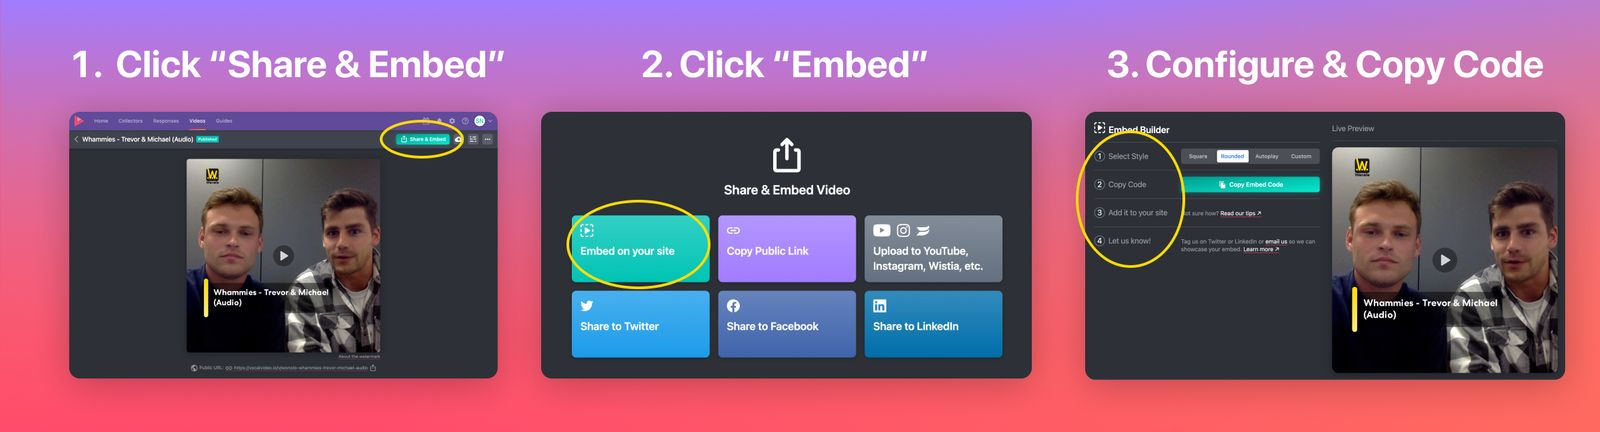 Easily share and embed video links with Vocal Video.